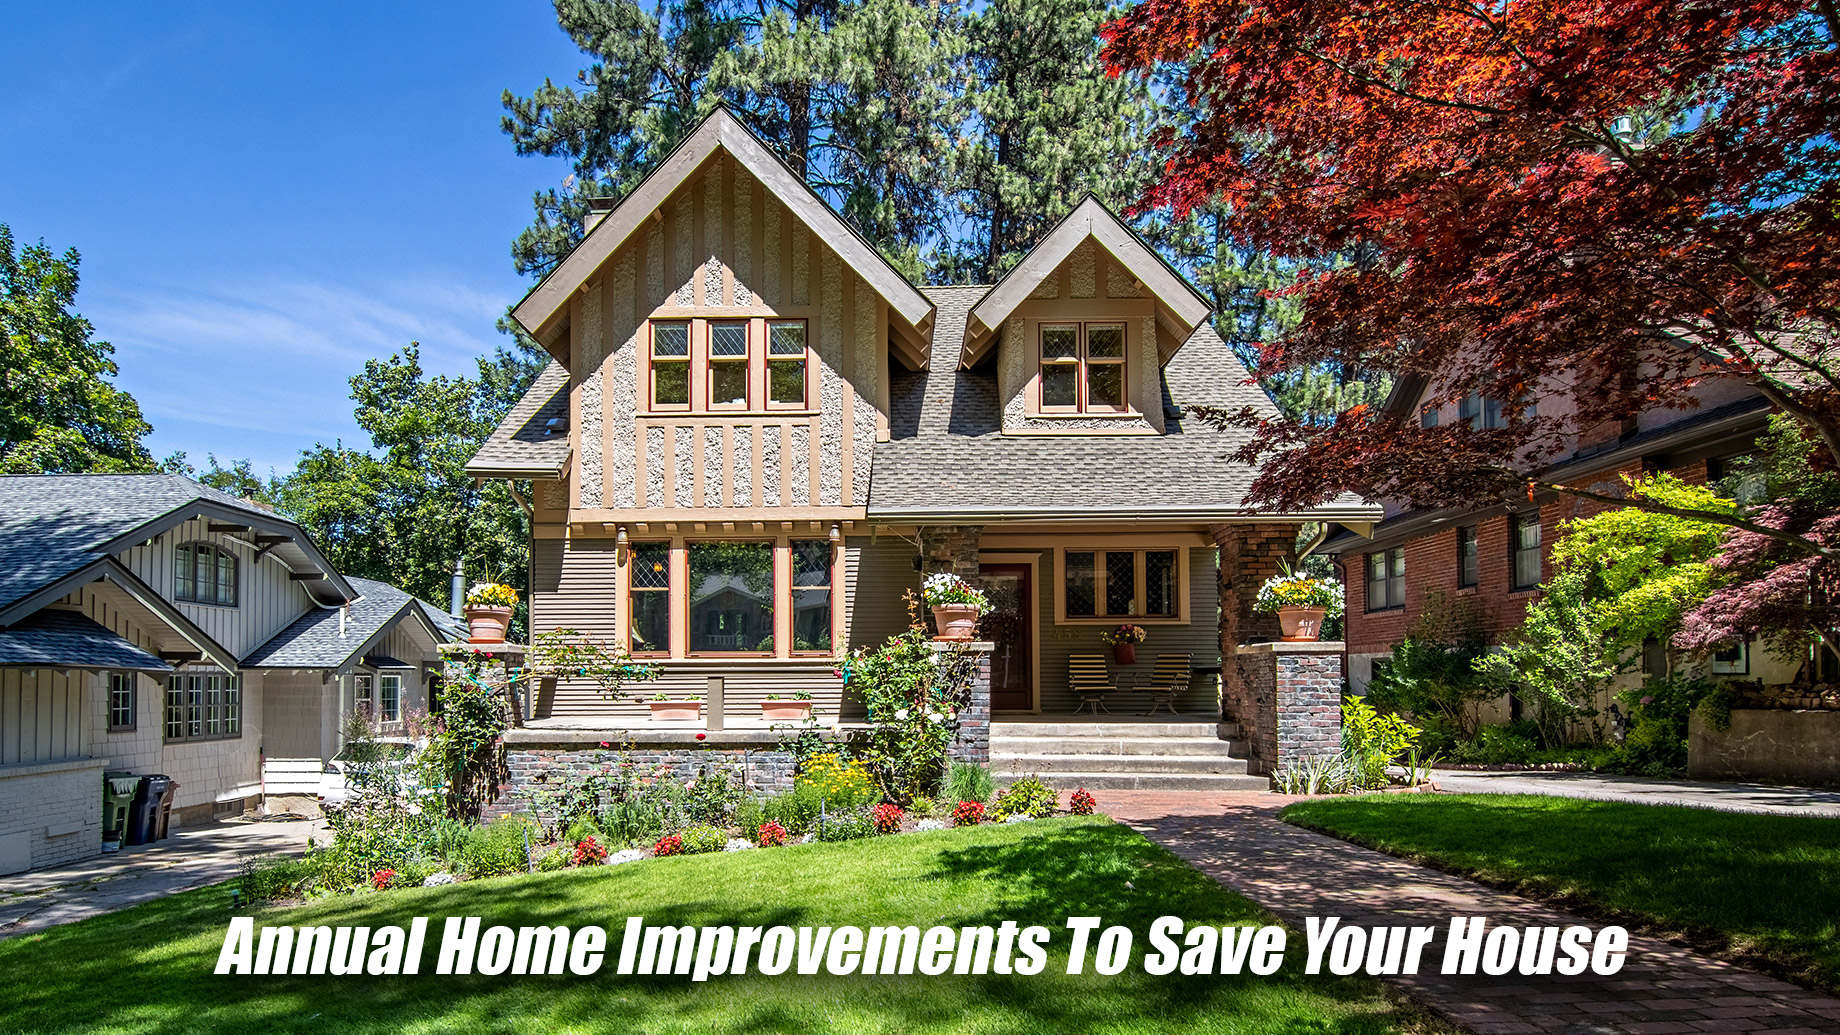 Annual Home Improvements To Save Your House